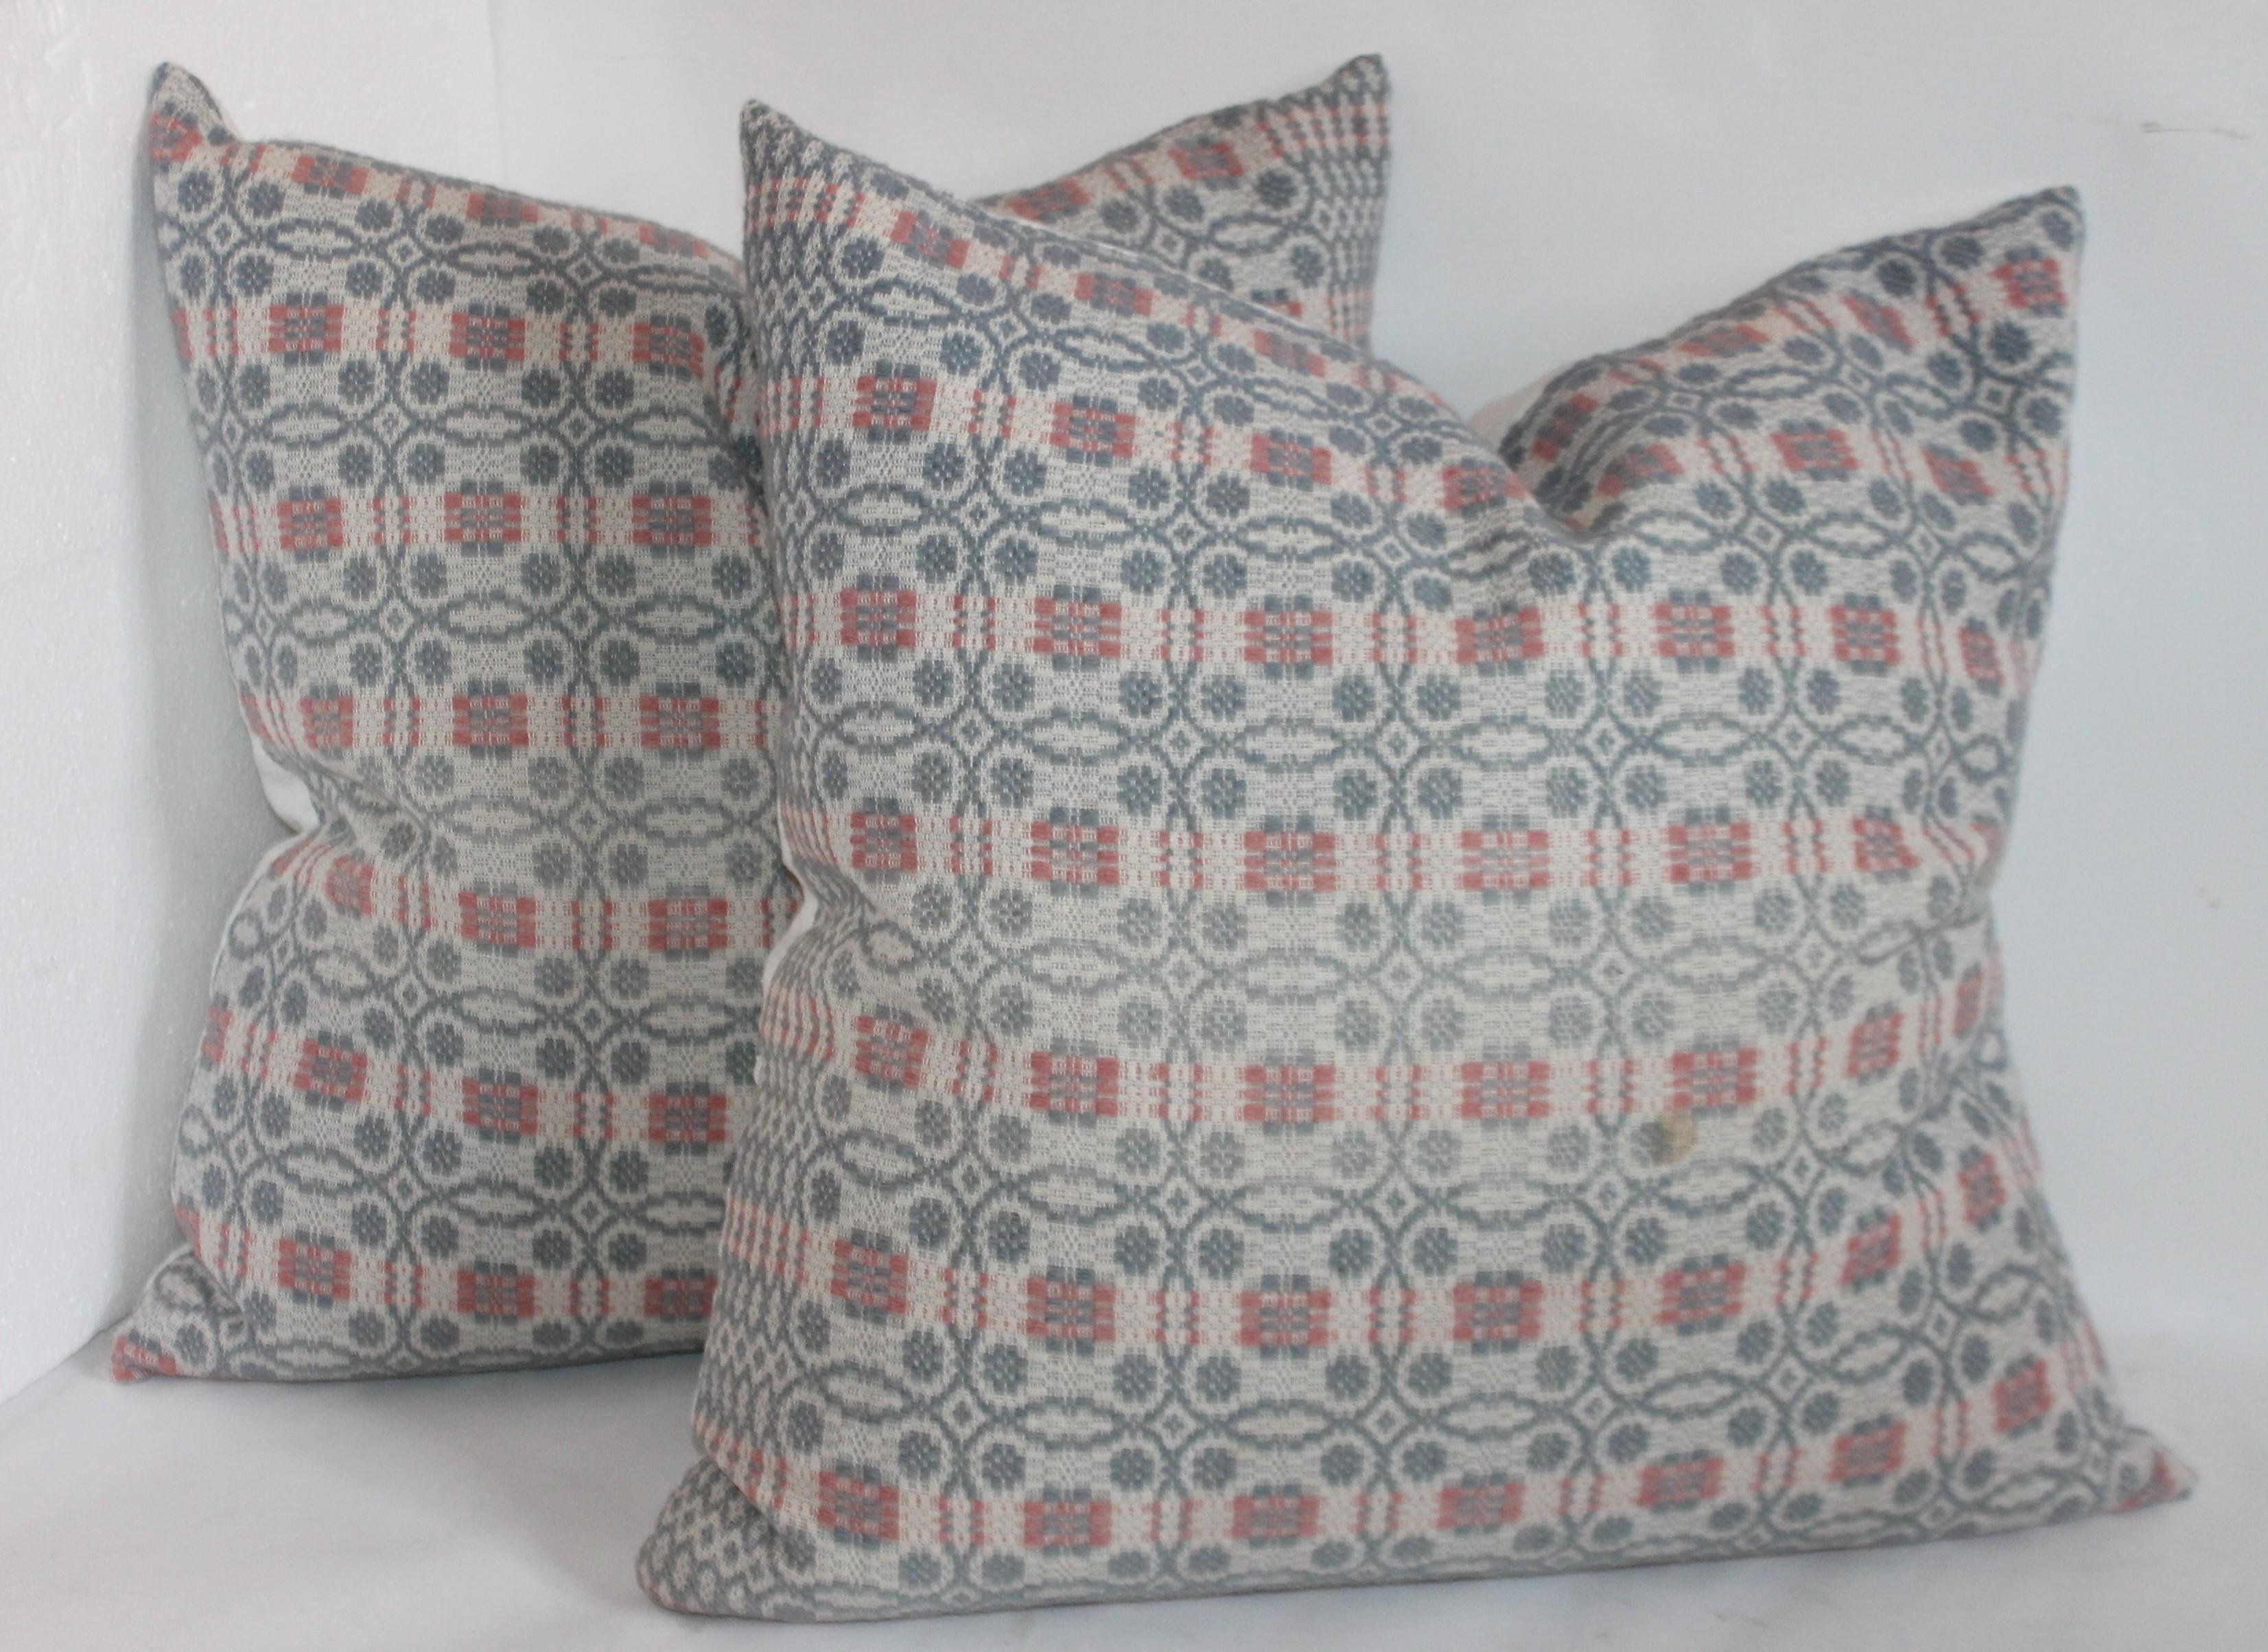 Hand-Crafted Collection of Woven Coverlet Pillows For Sale